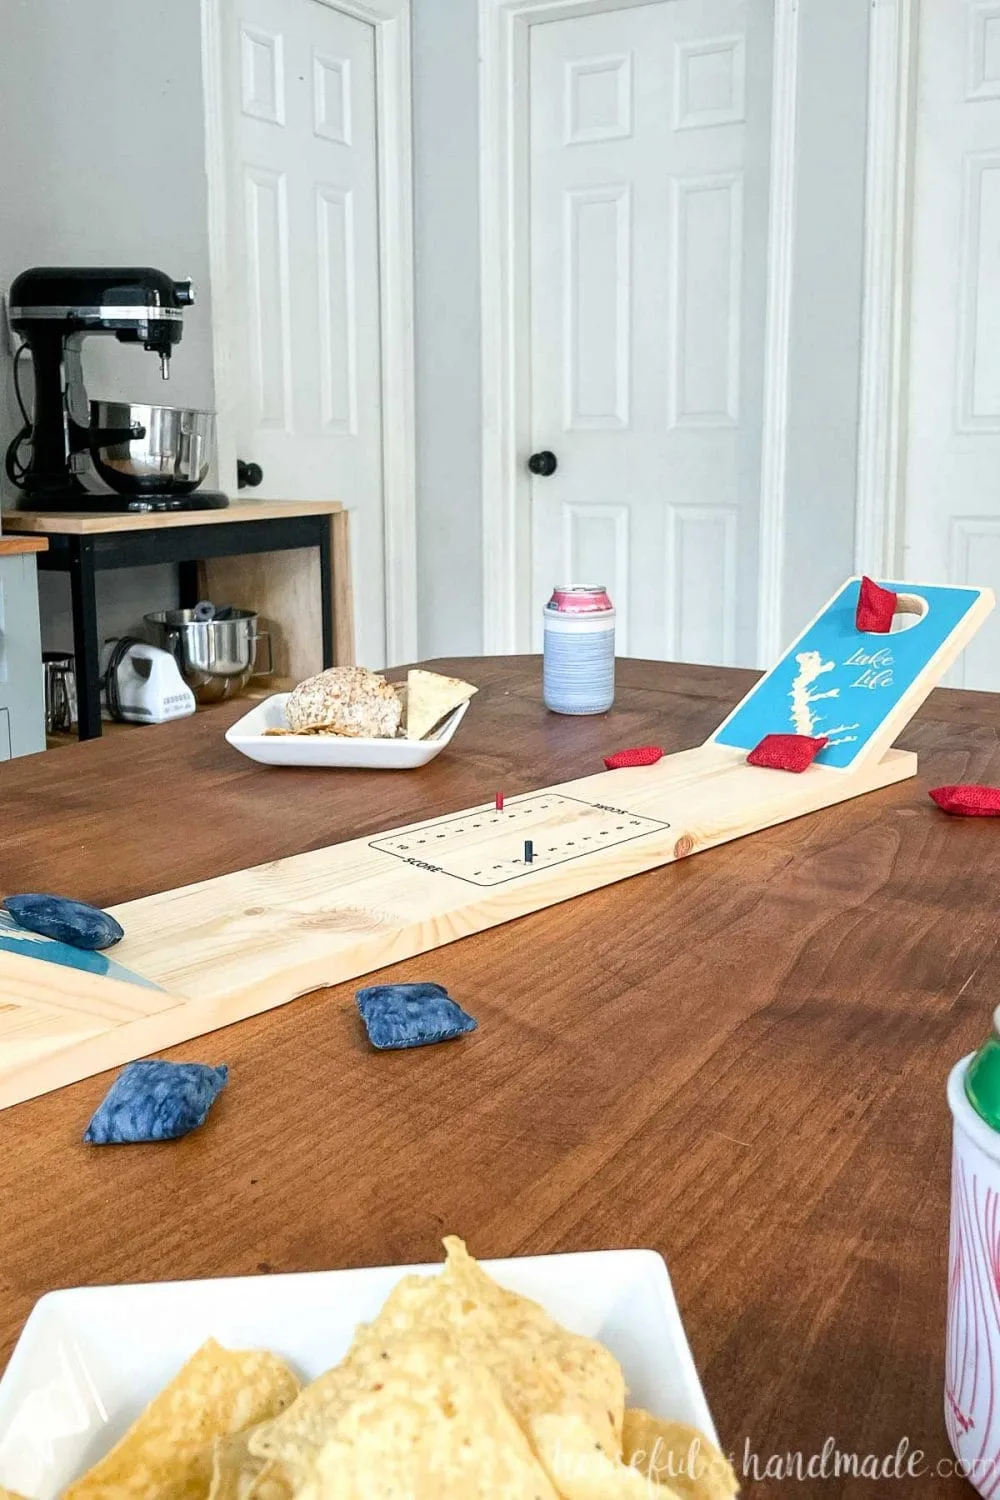 Looking across a dining table set for game night with snacks and a DIY tabletop cornhole game in the center. 